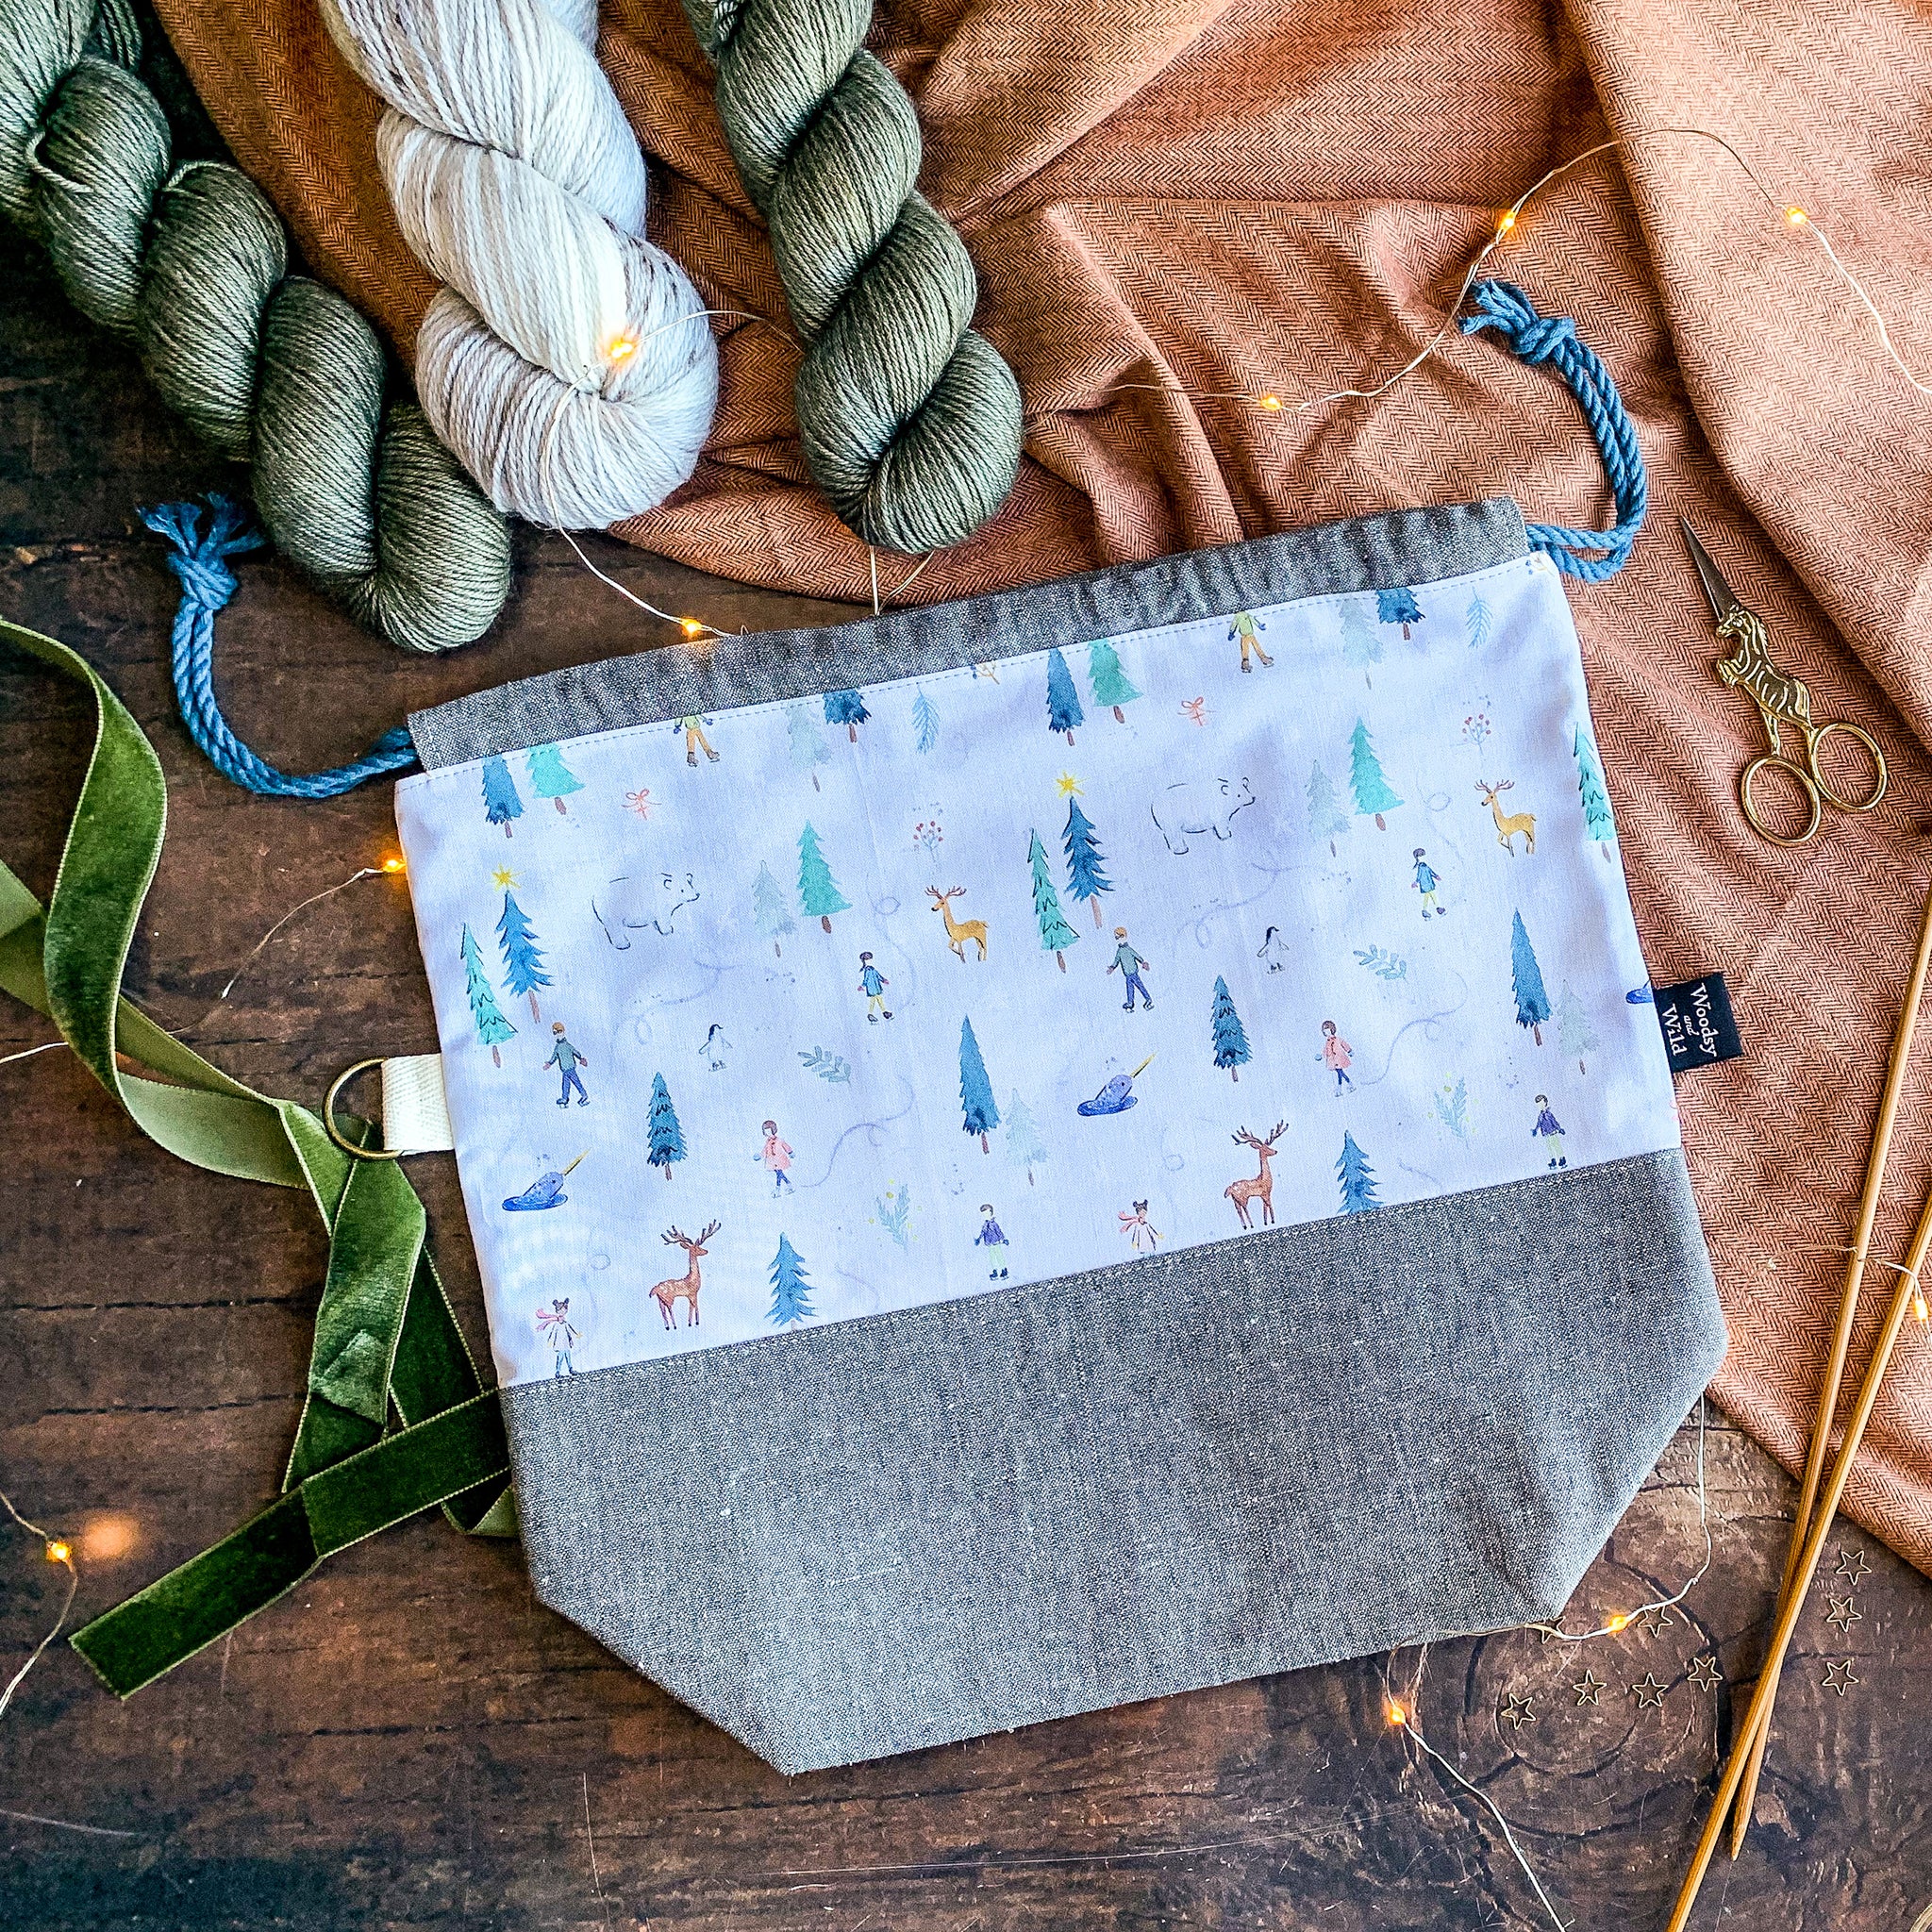 Magnolia- Knitting Project Bag- Ready to Ship – Woodsy and Wild